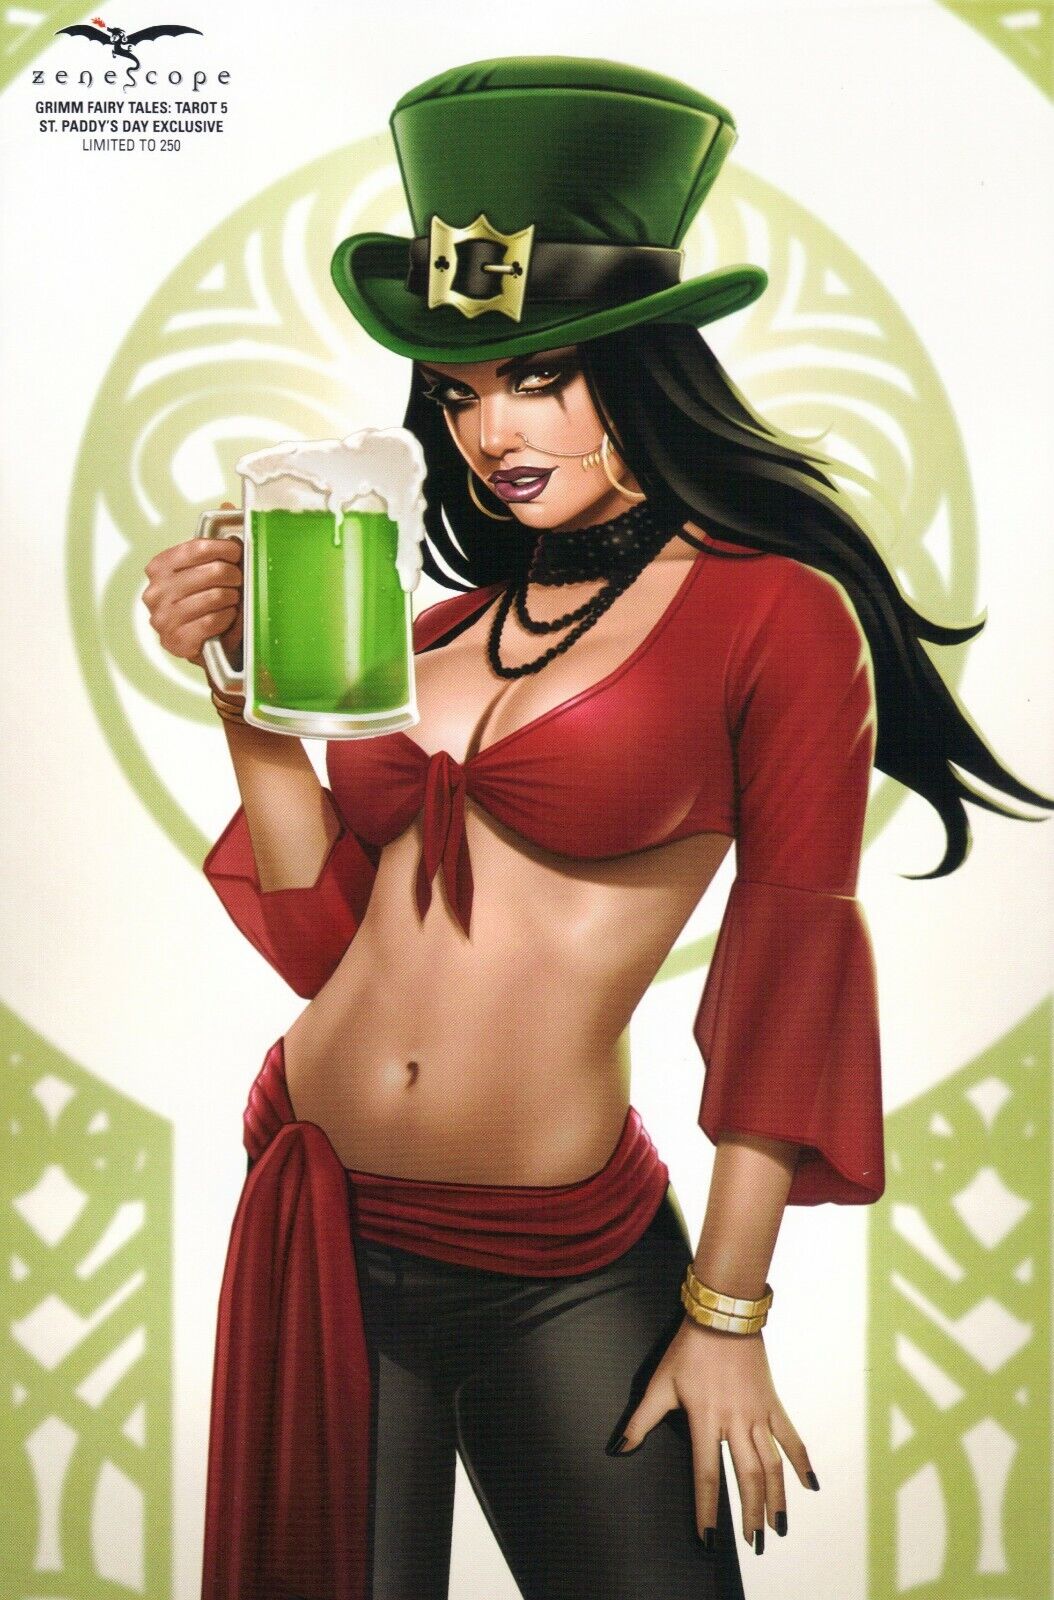 GRIMM FAIRY TALES: TAROT # 5 2018 ST PADDY'S DAY EXCLUSIVE COVER 'E' LTD TO 250